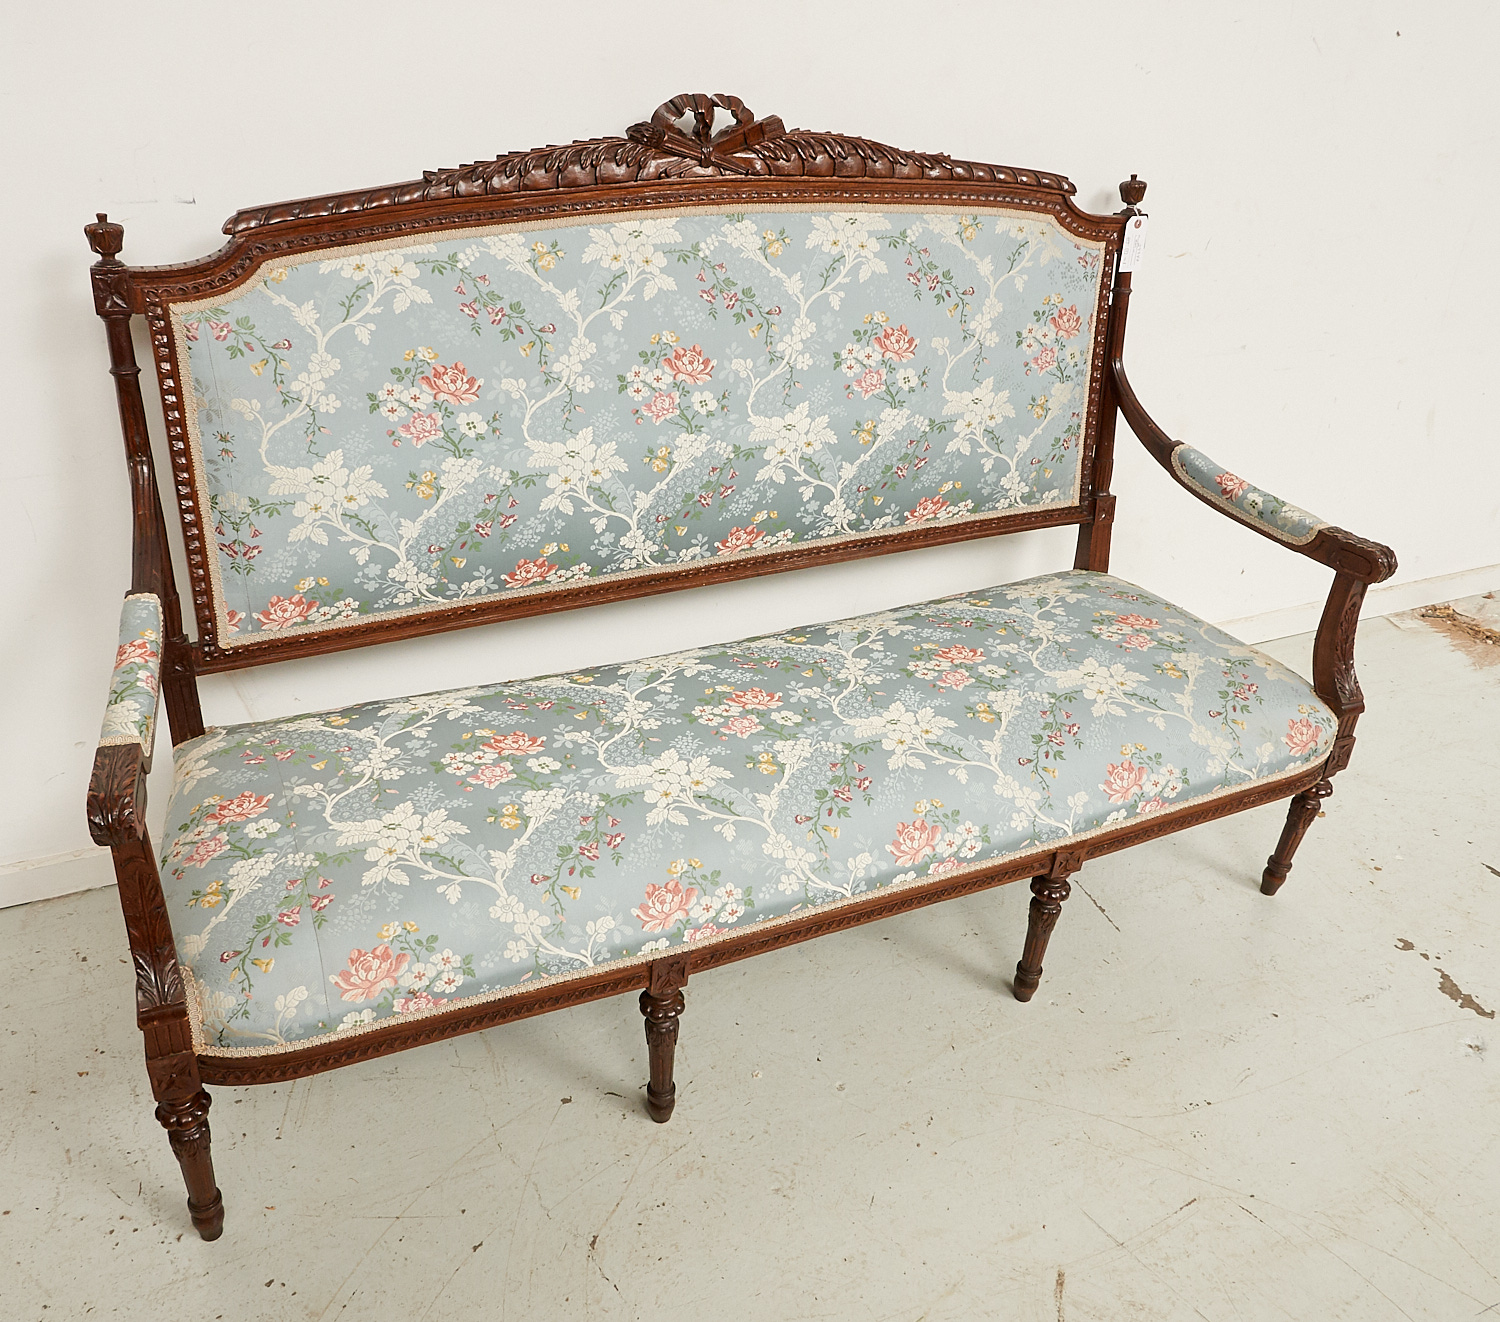 LOUIS XVI STYLE CARVED DAMASK UPHOLSTERED 2ceef9